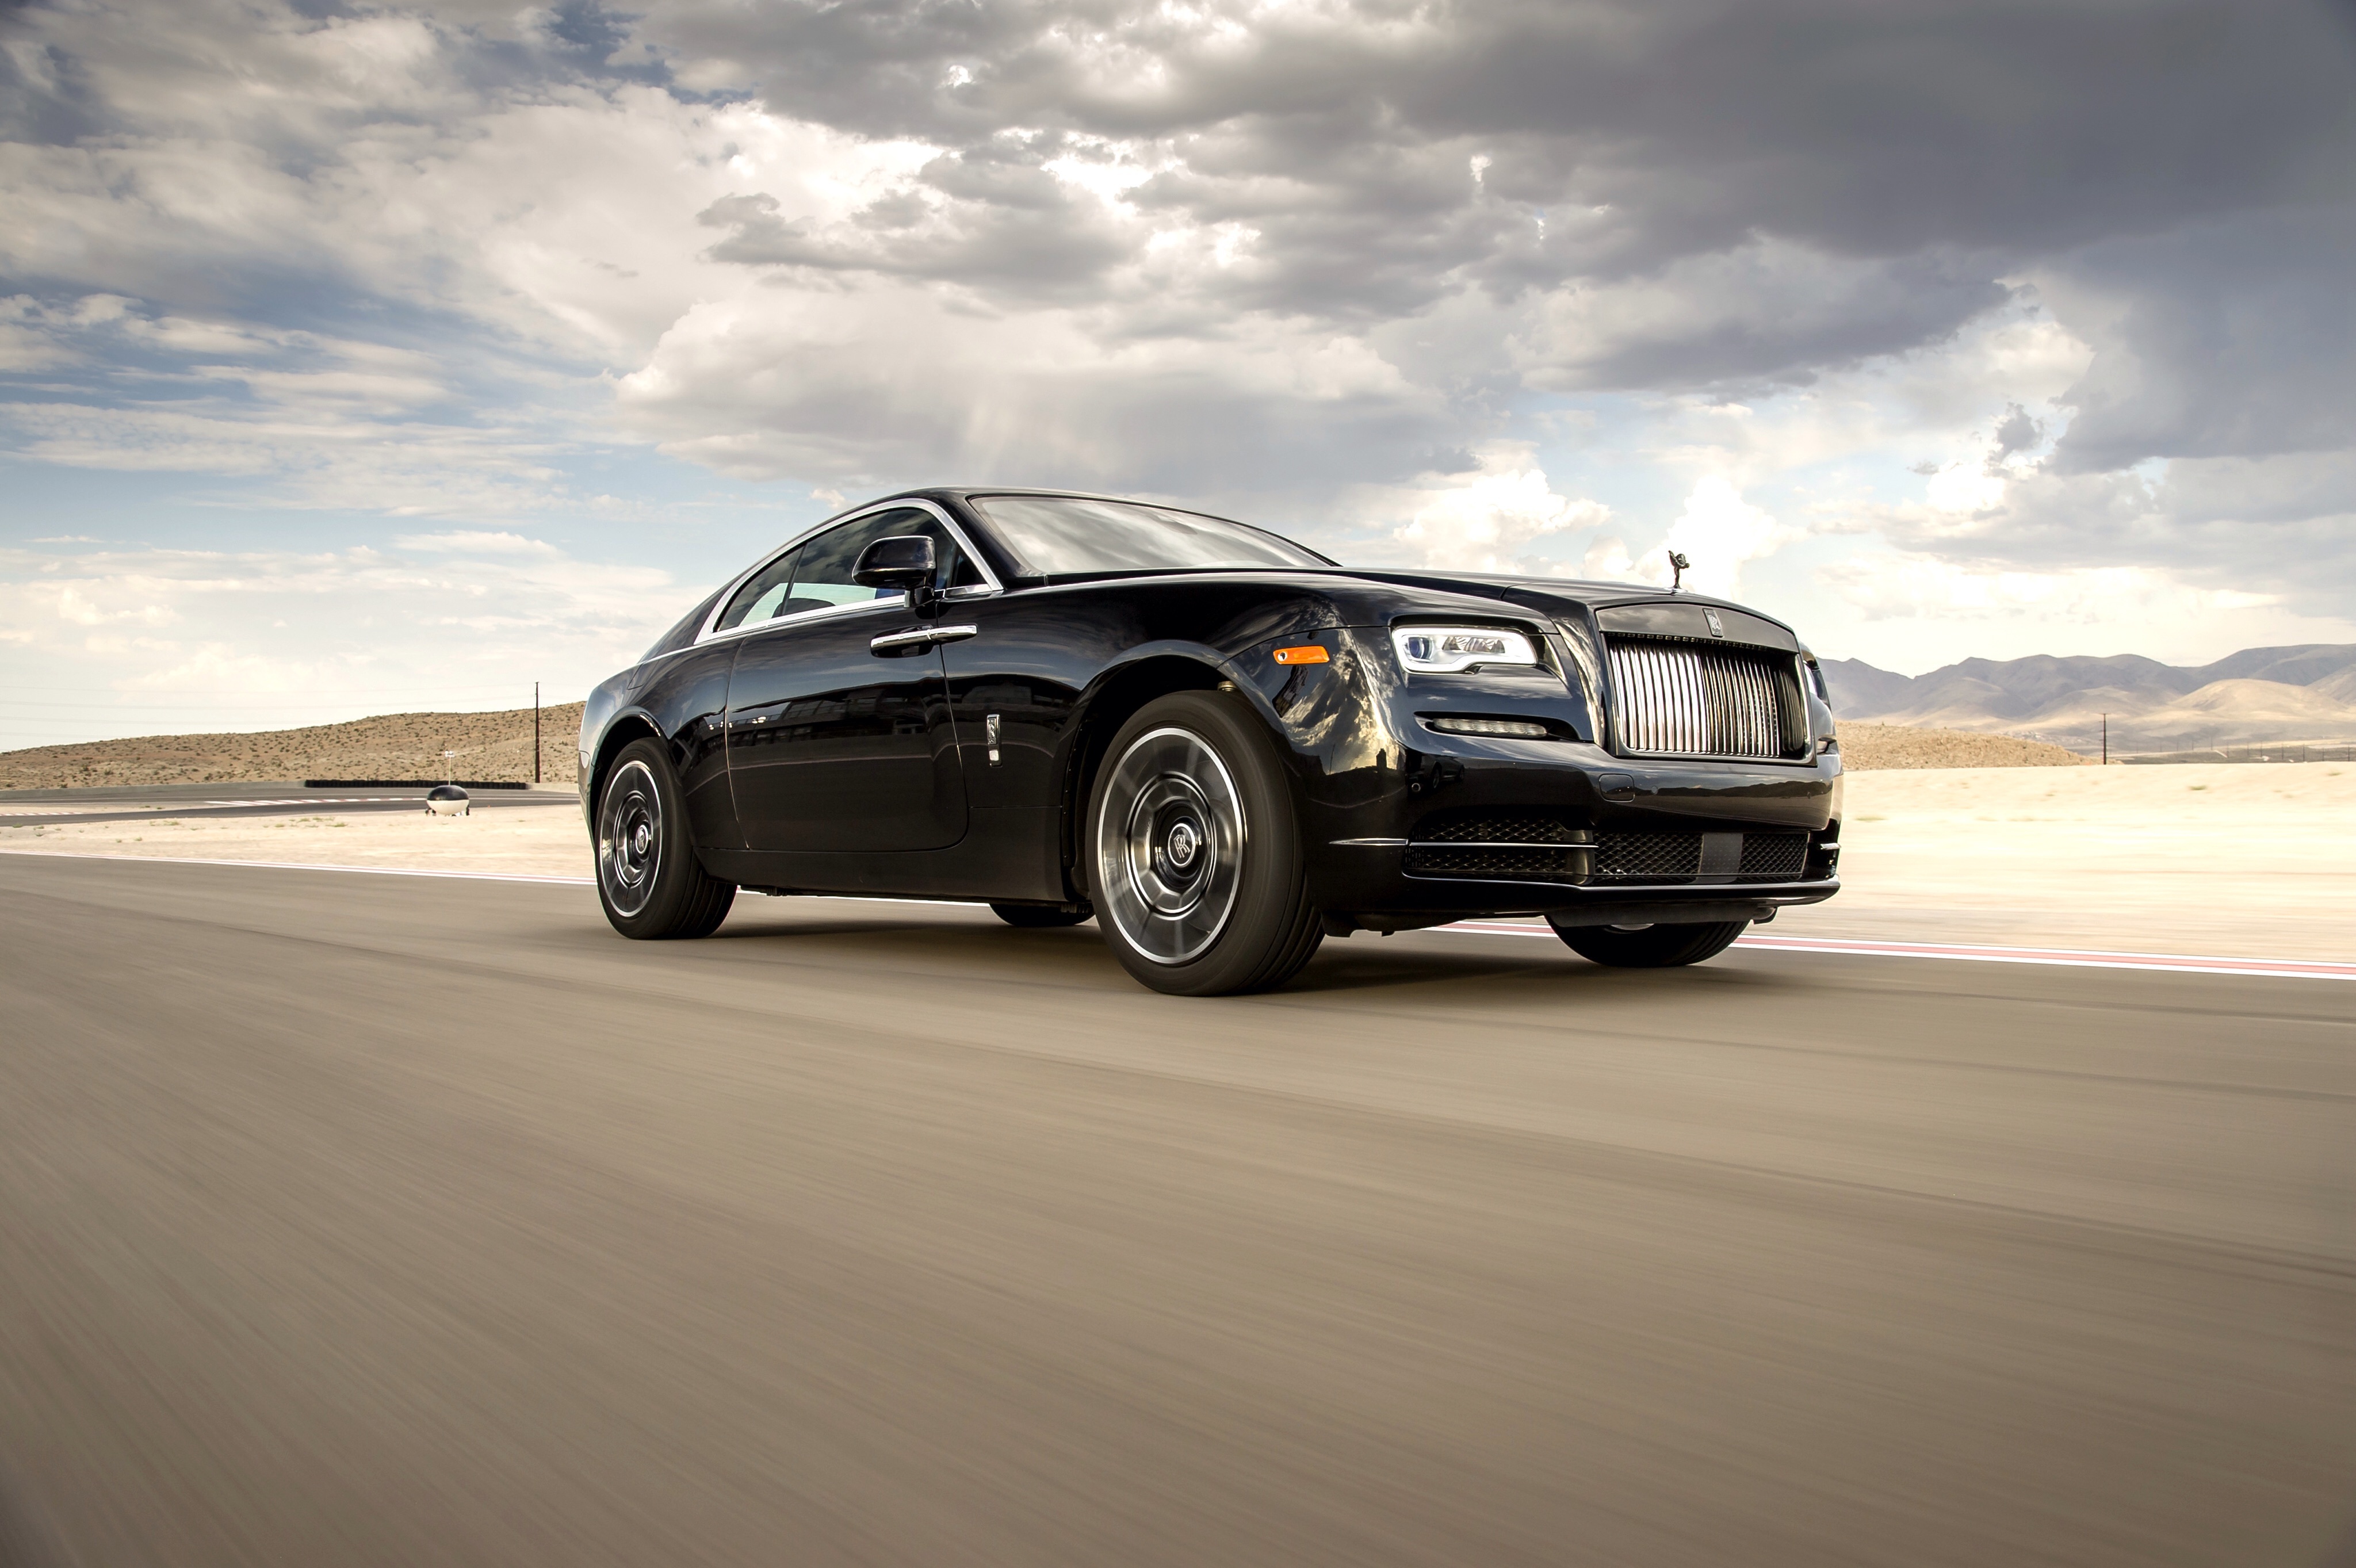 rolls-royce, cars, traffic, movement, side view, wraith